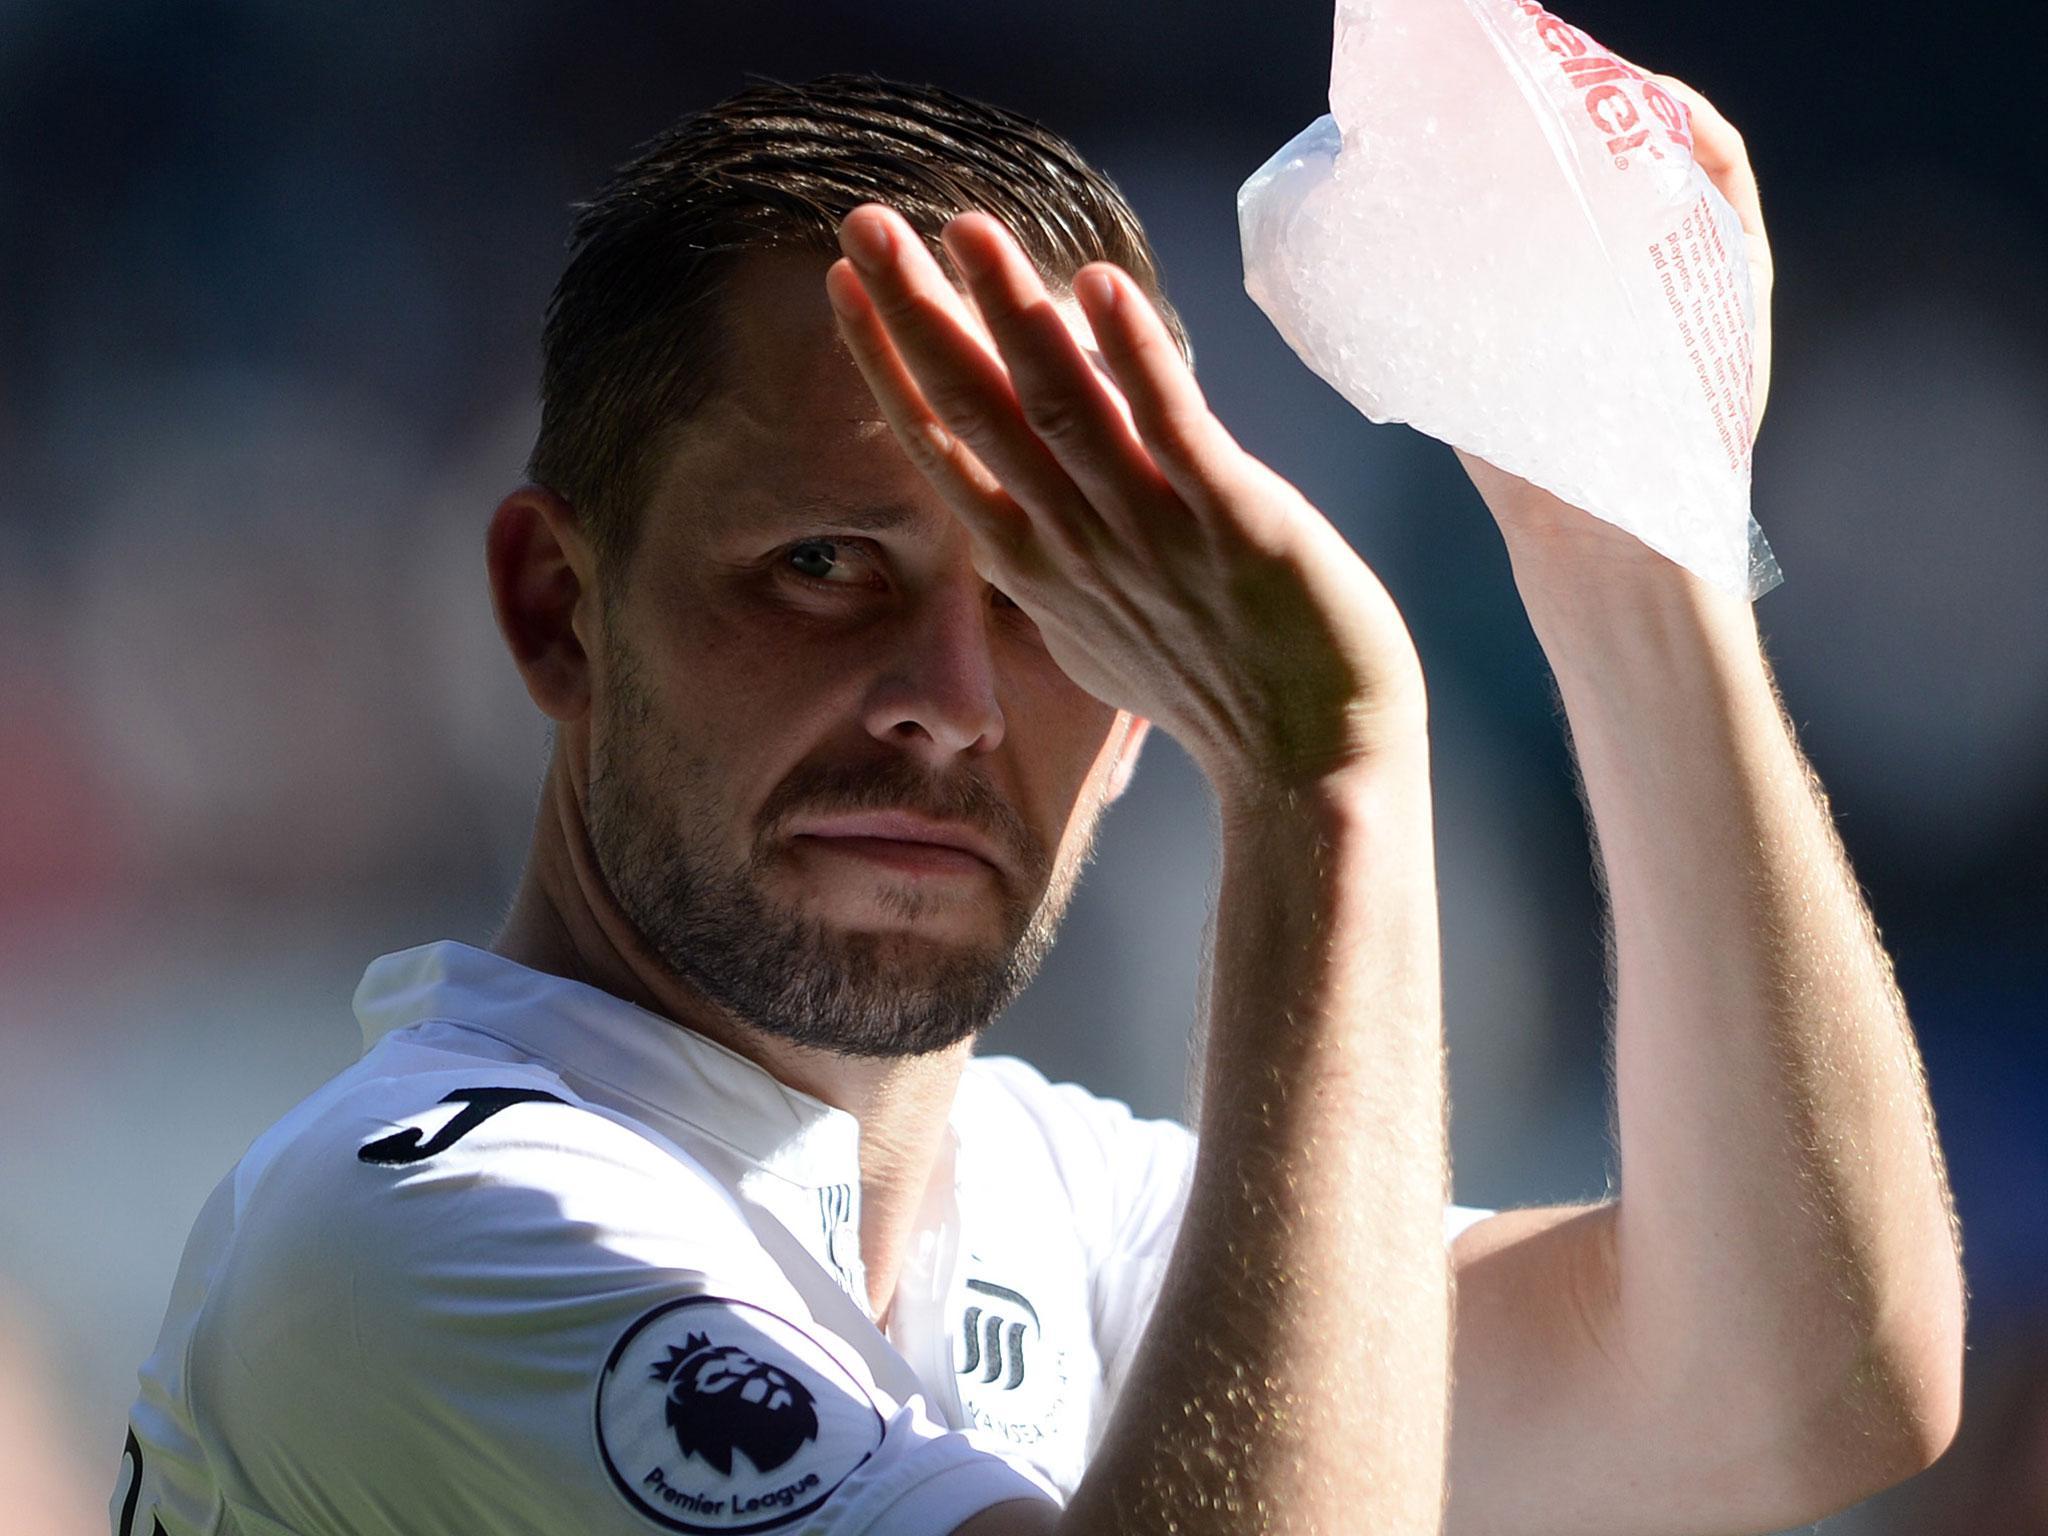 Gylfi Sigurdsson is set to become the most expensive player in Everton's history